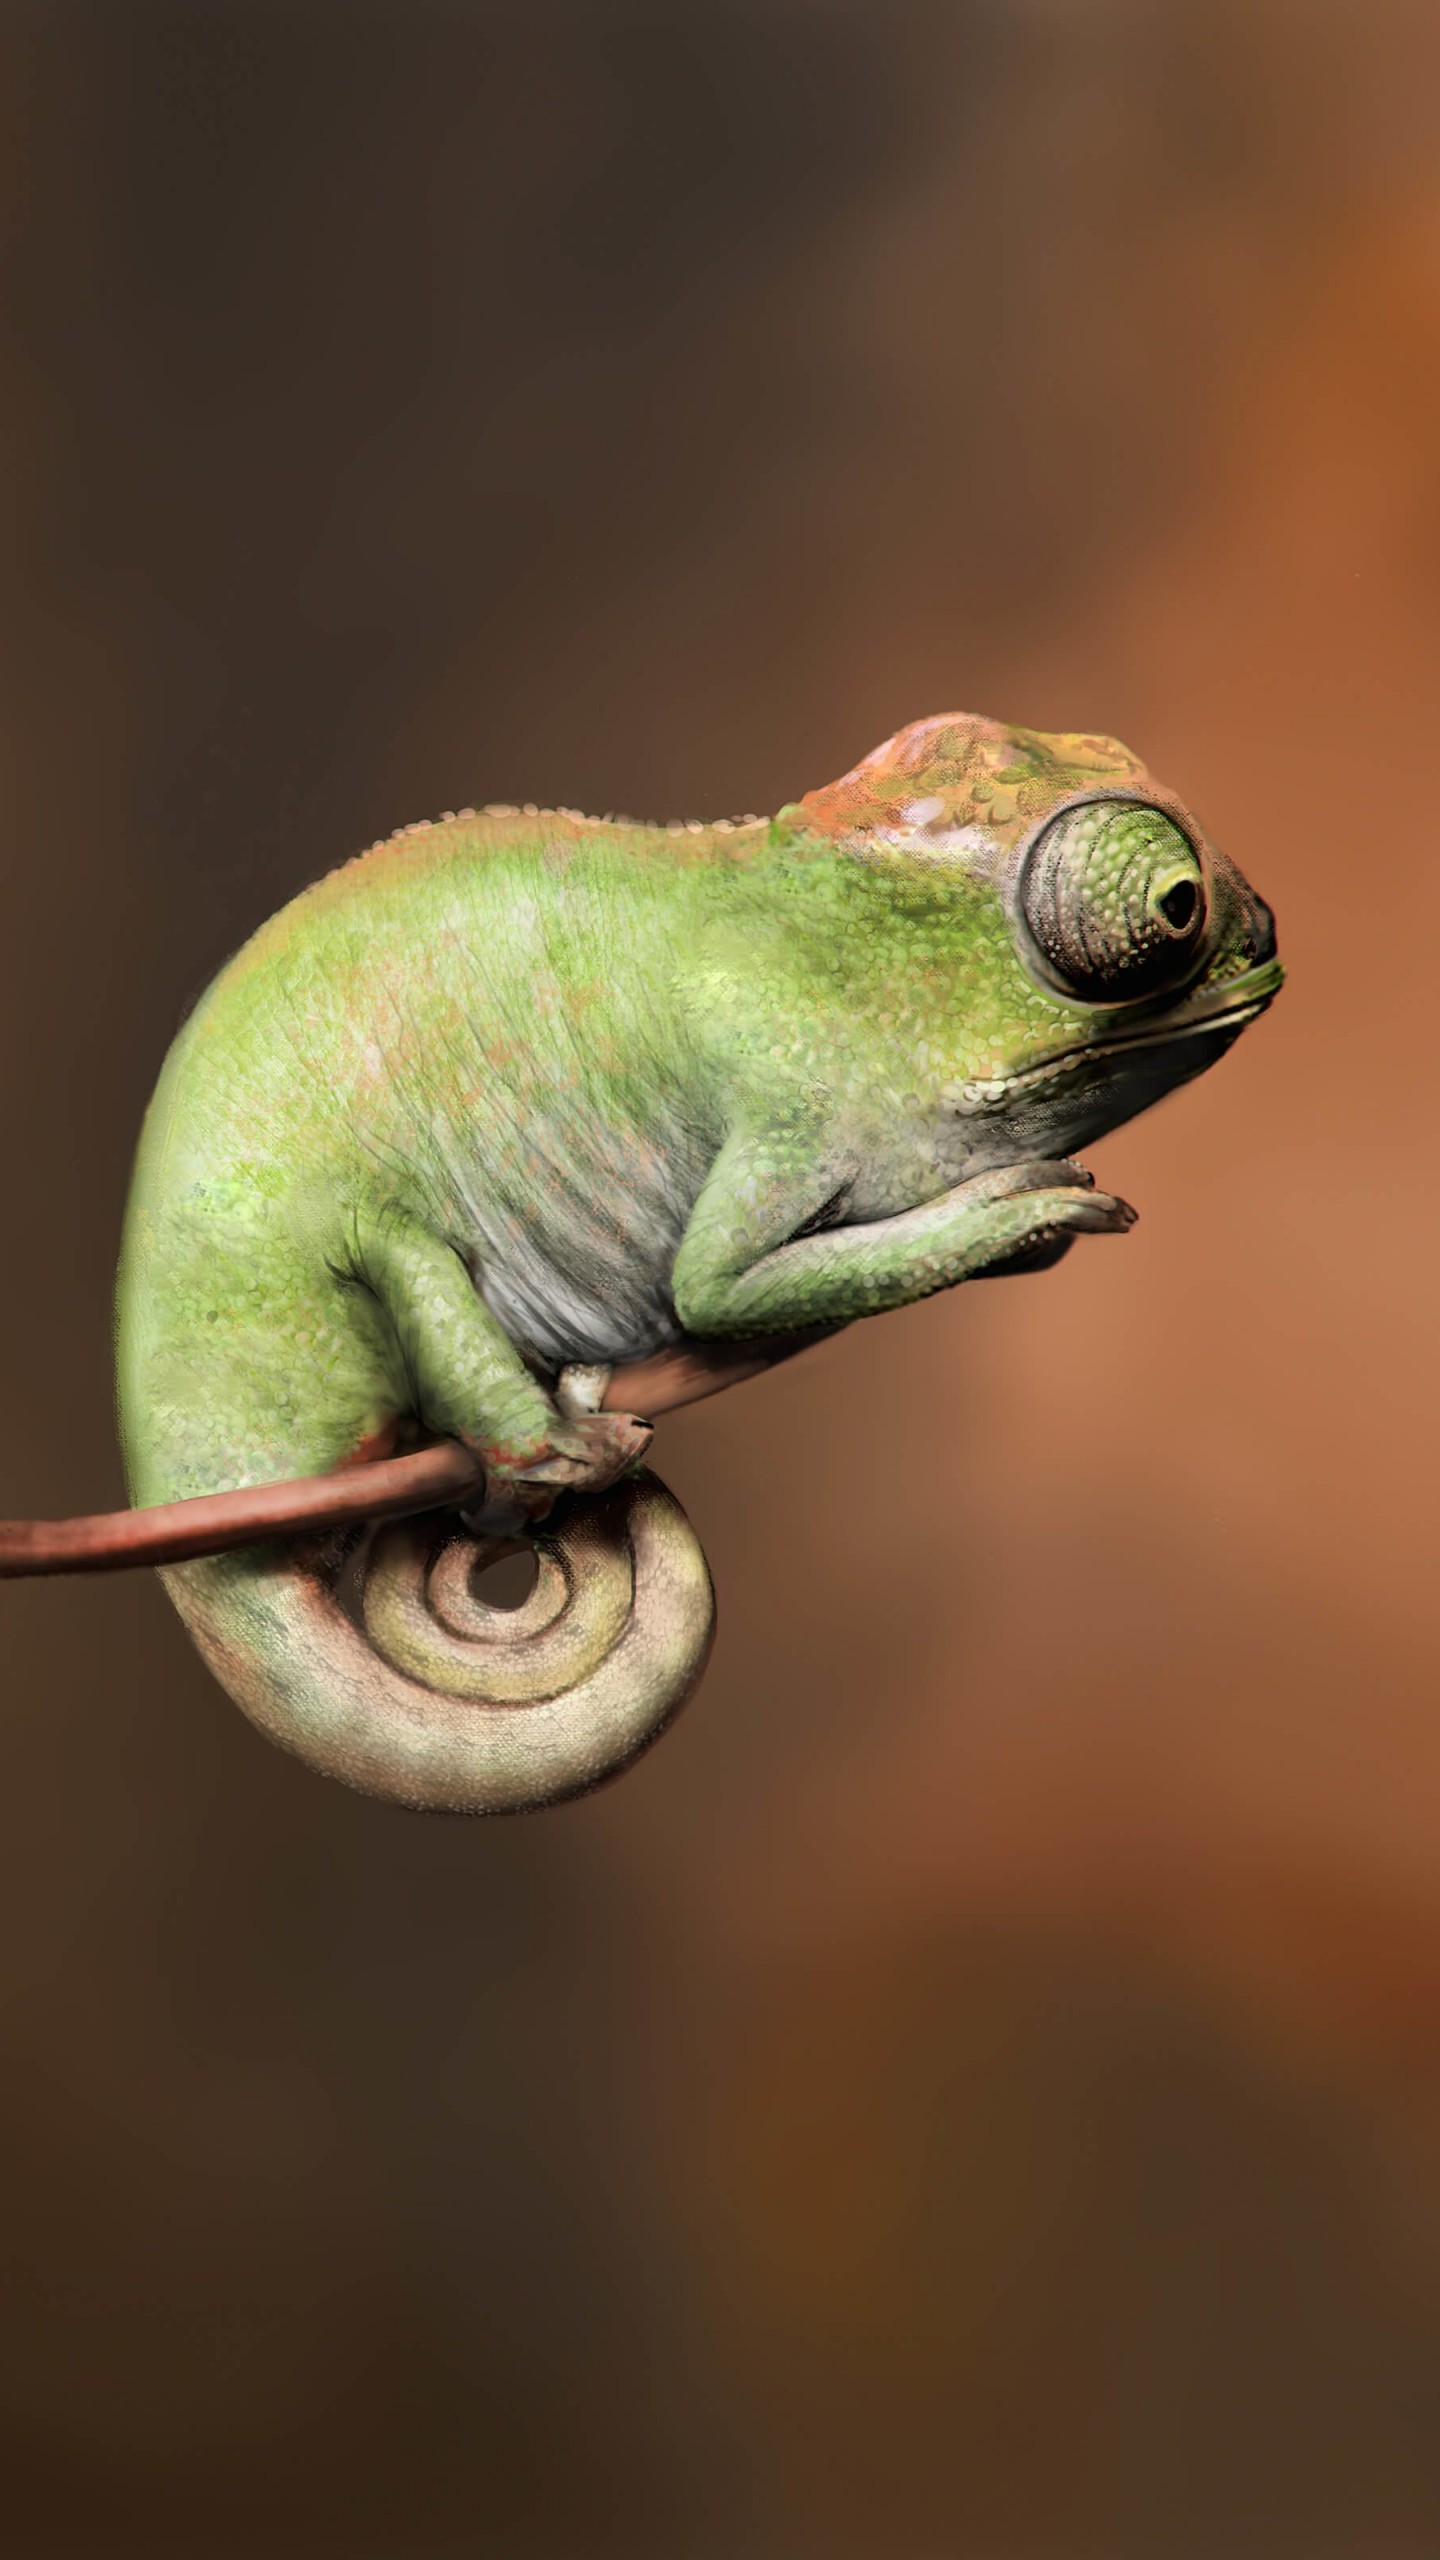 Baby Chameleon Perching On a Twisted Branch Wallpaper for SAMSUNG Galaxy Note 4